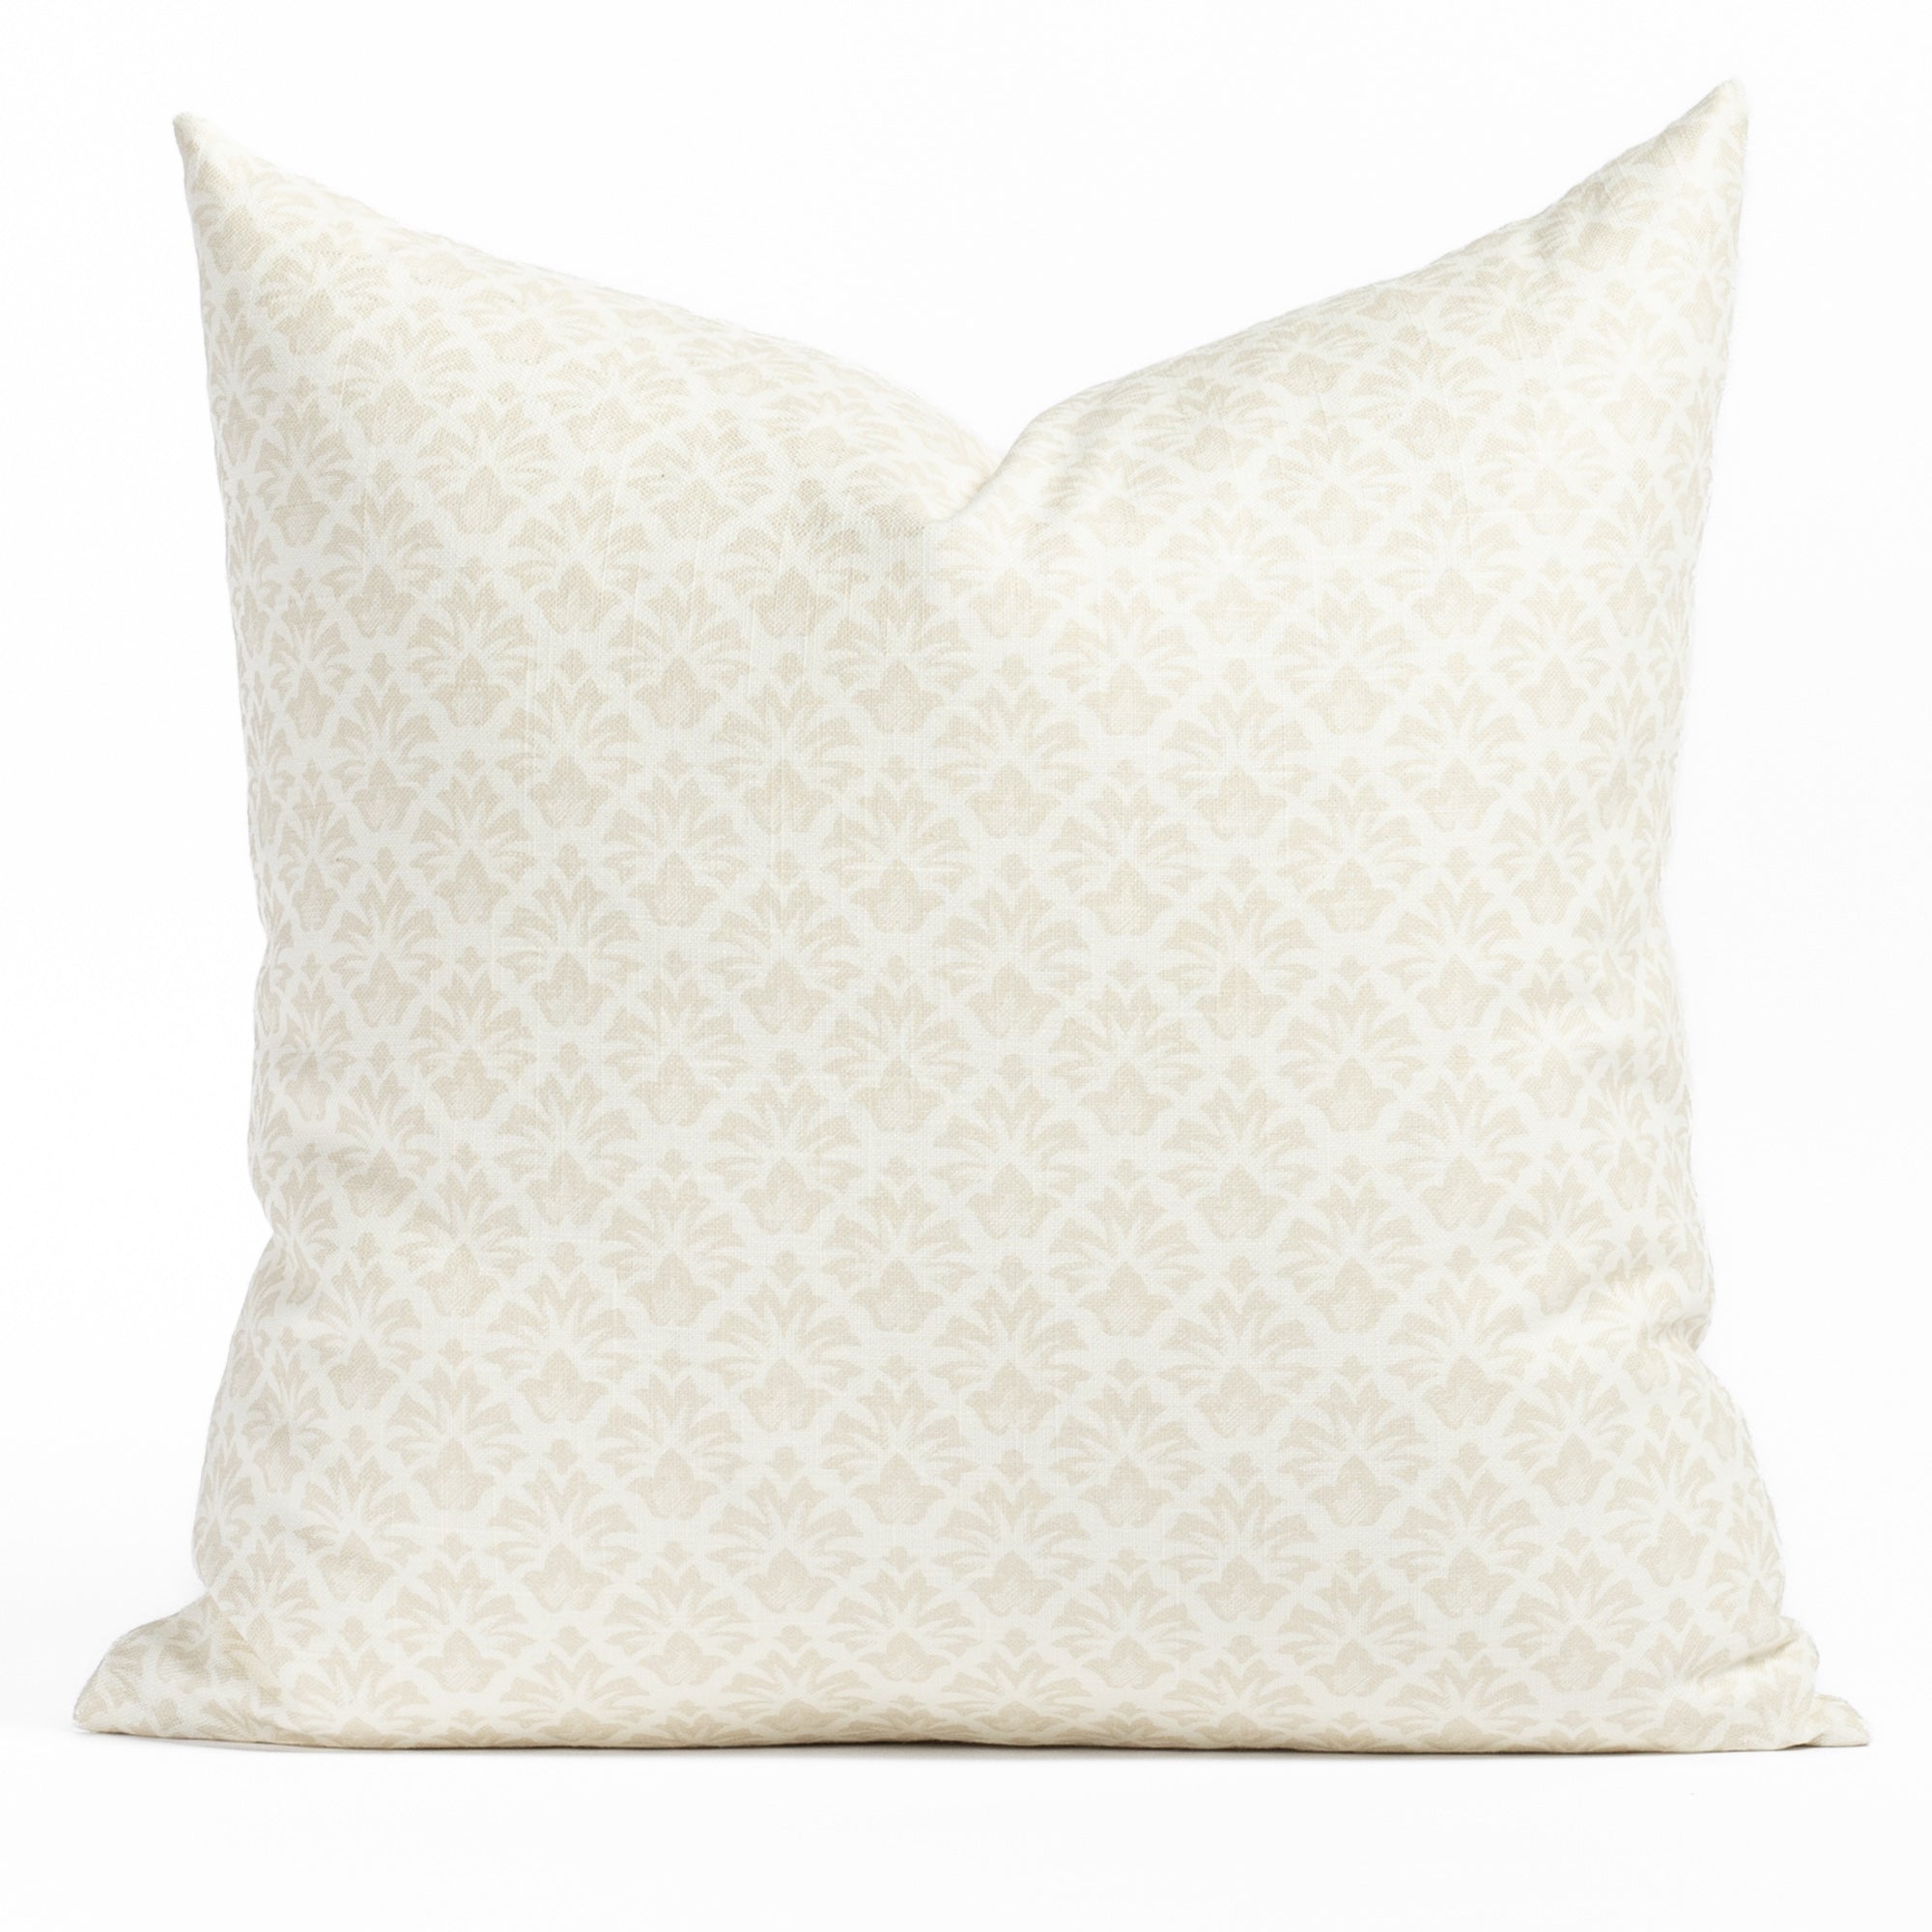 Calli 24x24 Pillow Parchment, a cream and putty beige floral block print throw pillow from Tonic Living